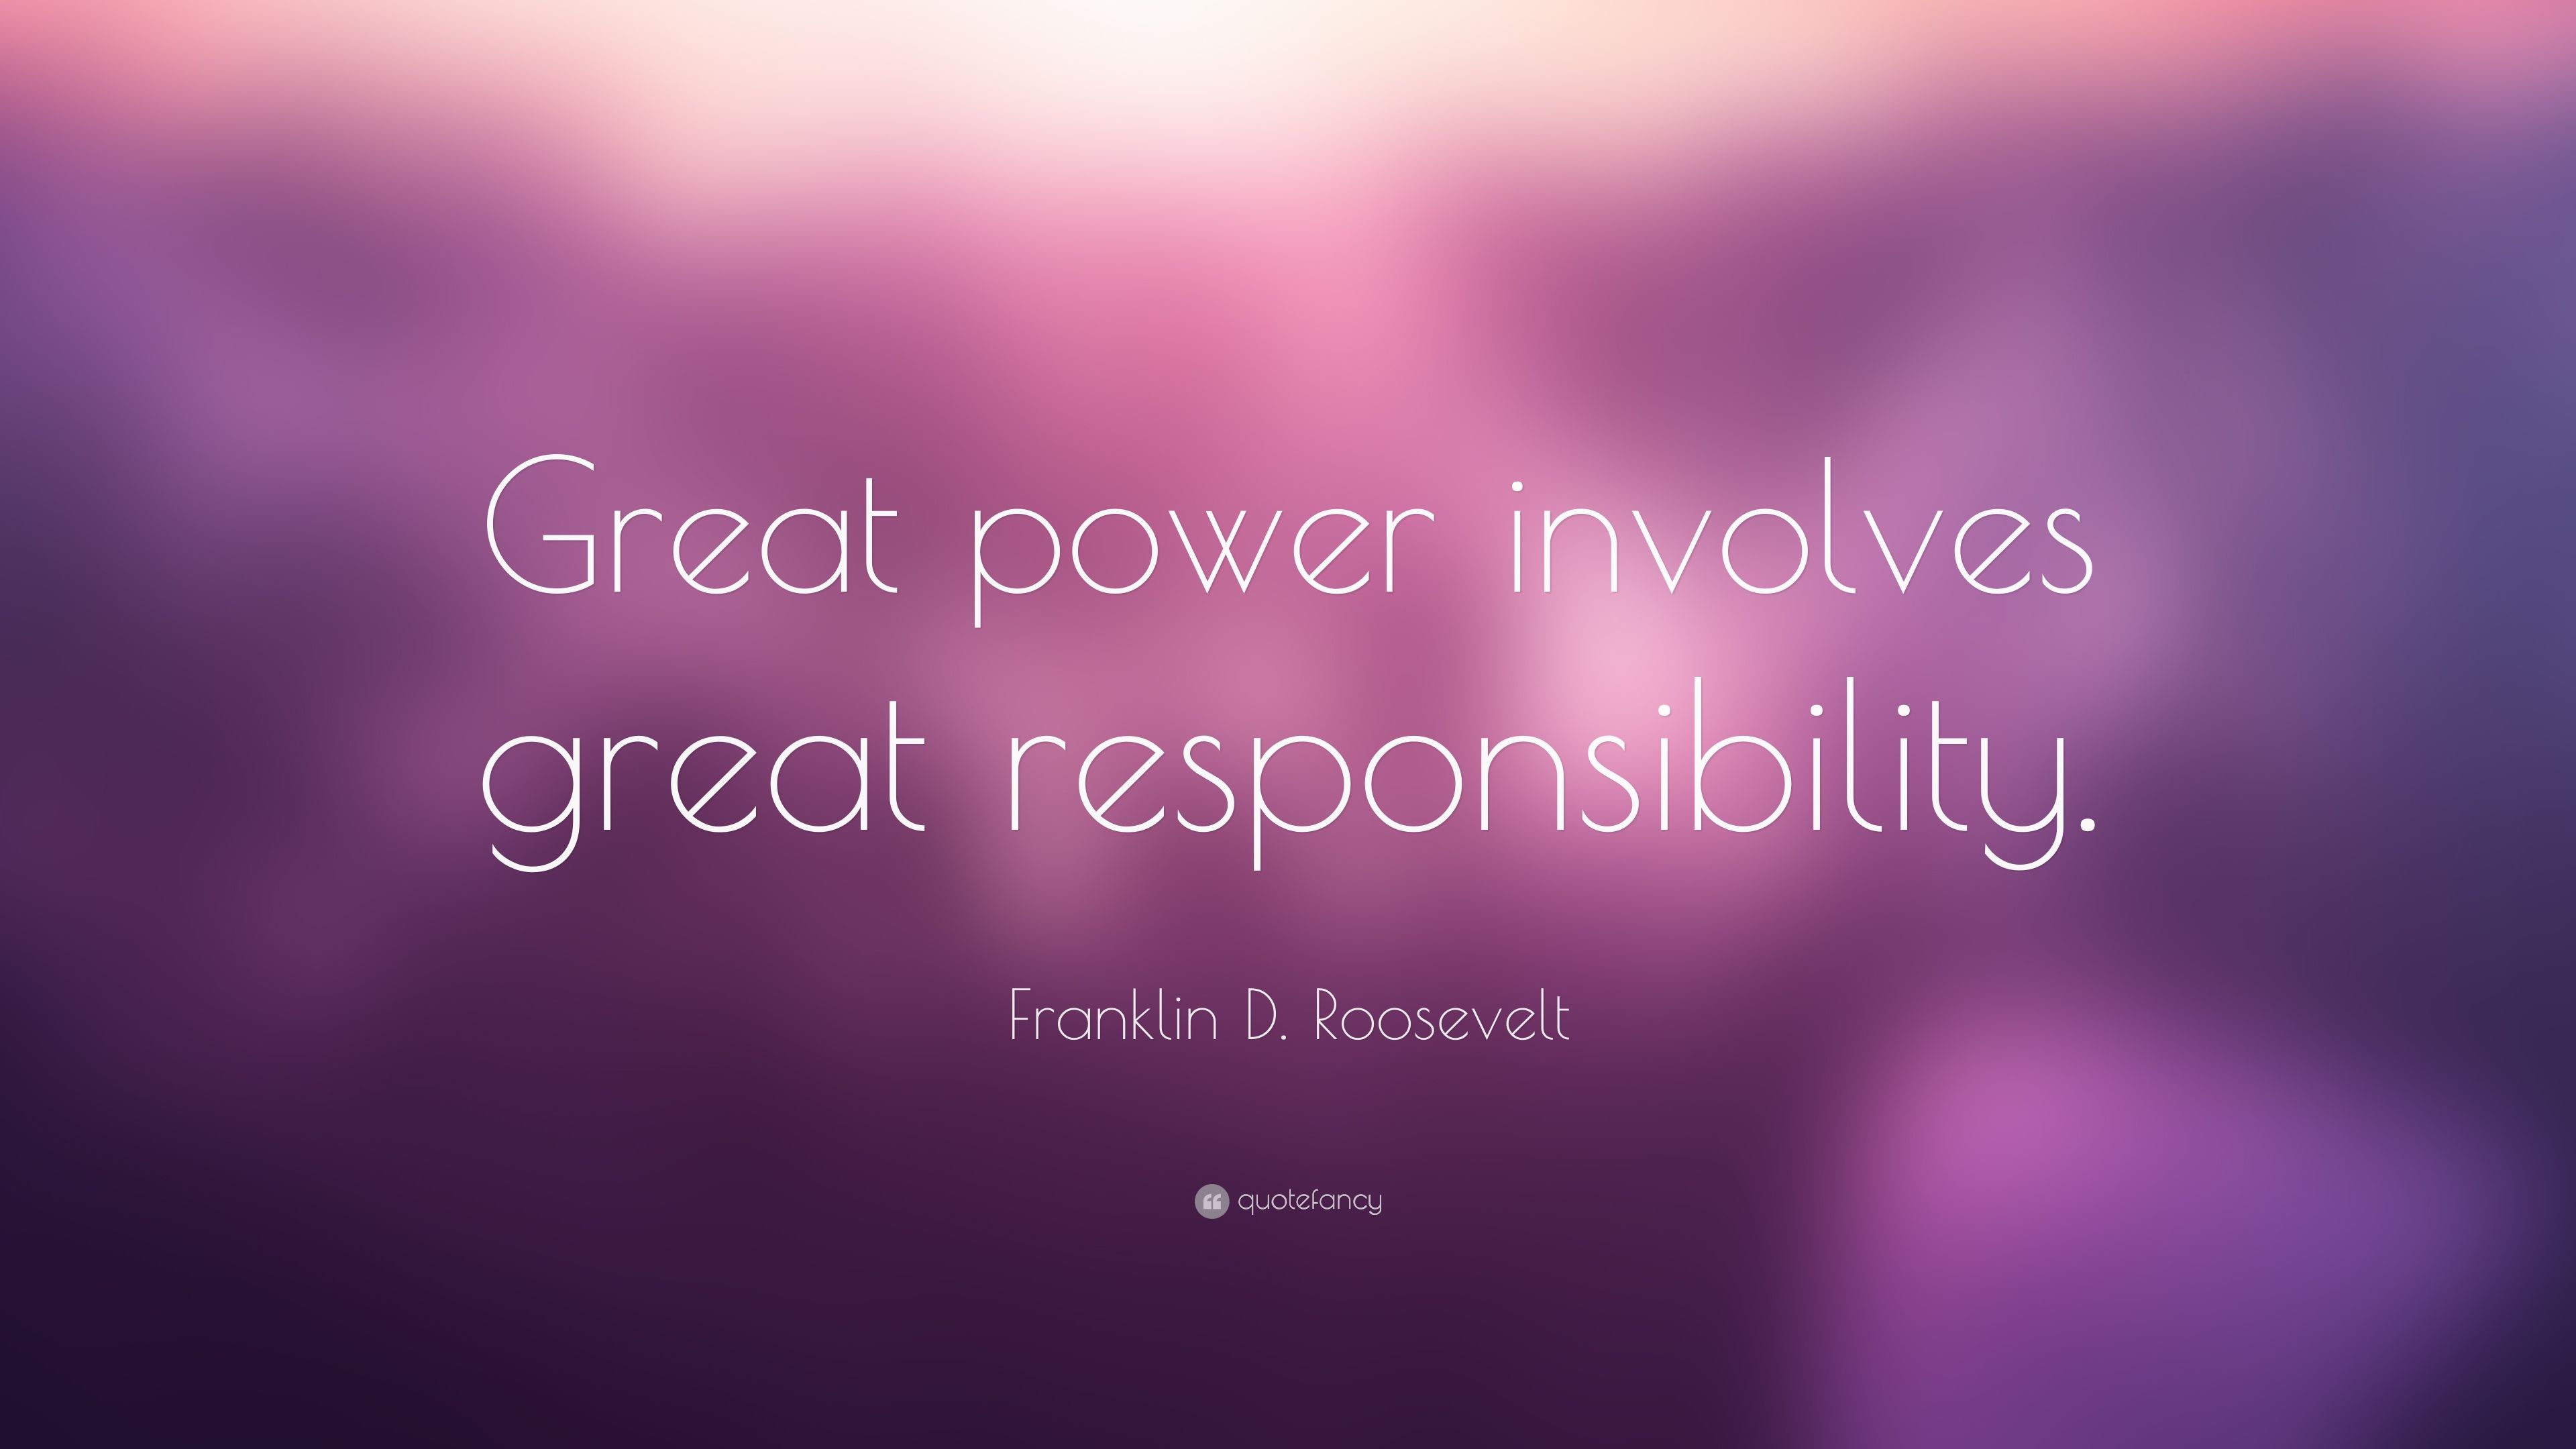 Franklin D. Roosevelt Quote: “Great power involves great responsibility.” (16 wallpaper)